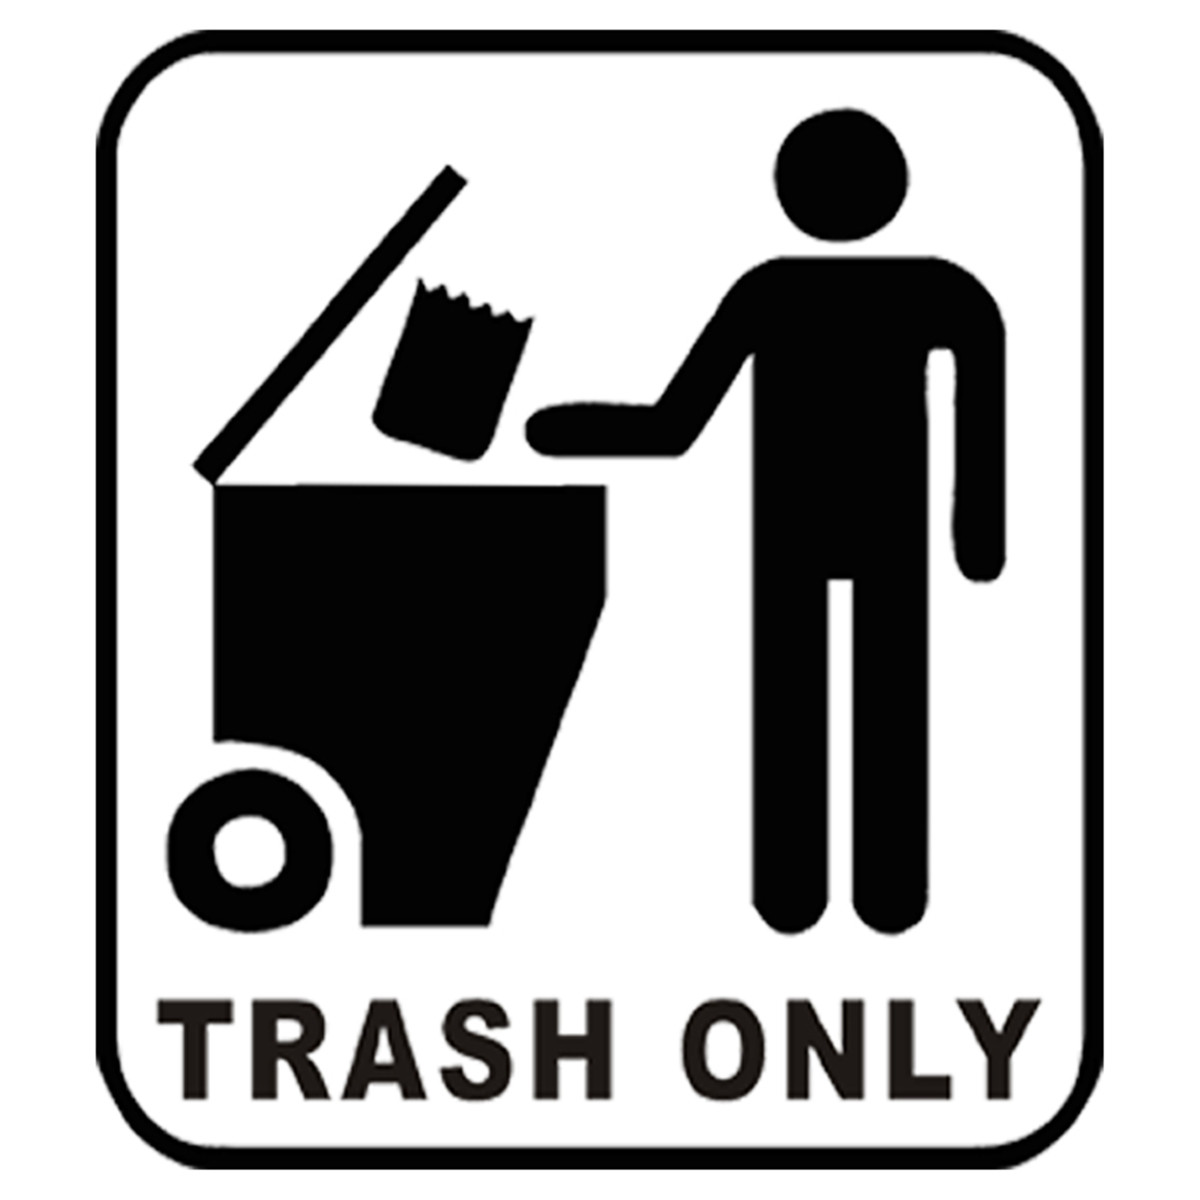 Trash Only Vinyl Decal Sticker Recycle Recycling Garbage Bin Pick Size